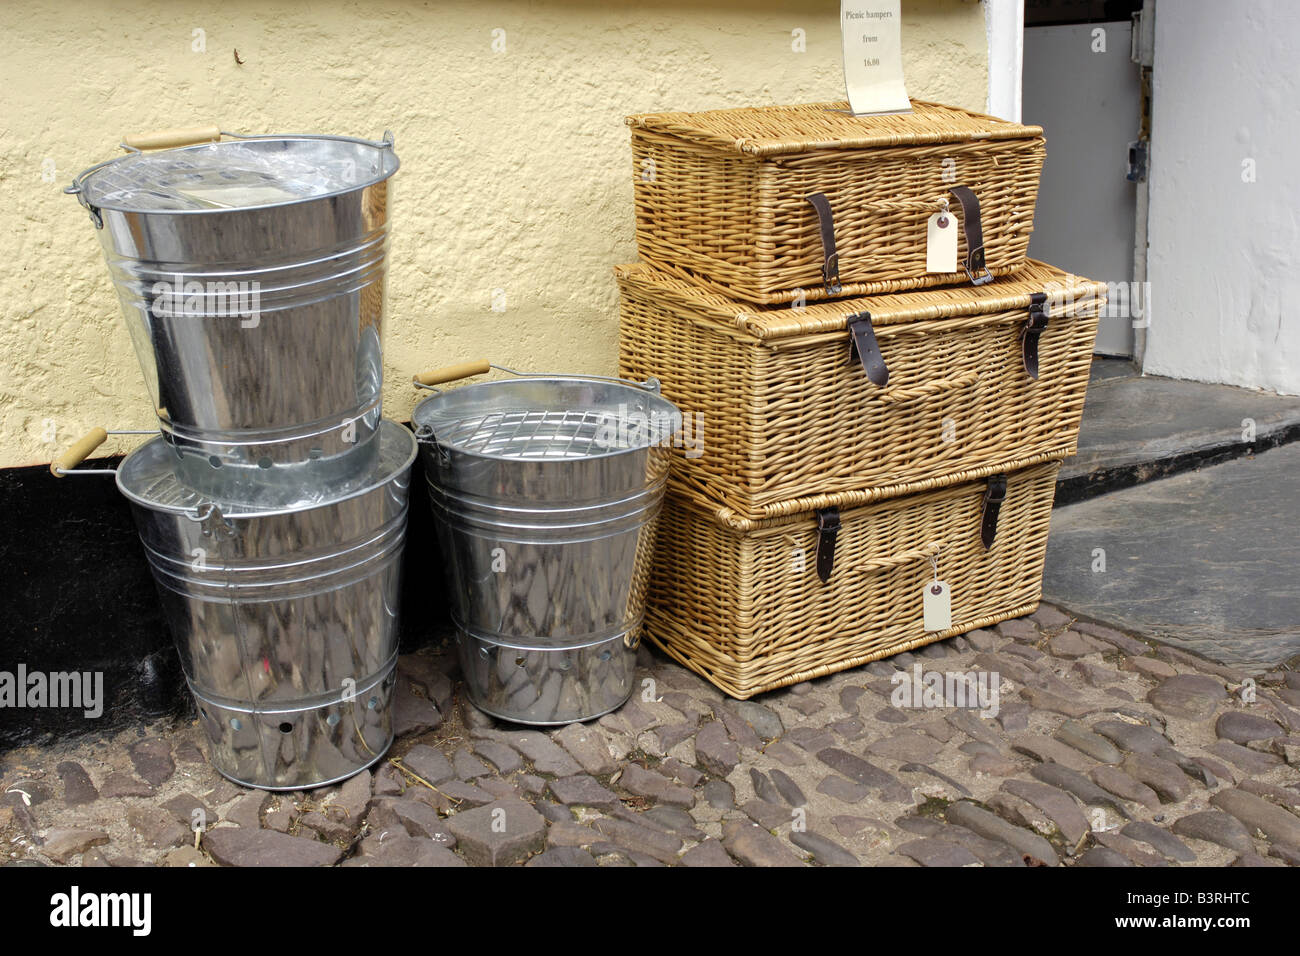 Traditional Wicker hamper baskets and stainless steel milking buckets Stock Photo